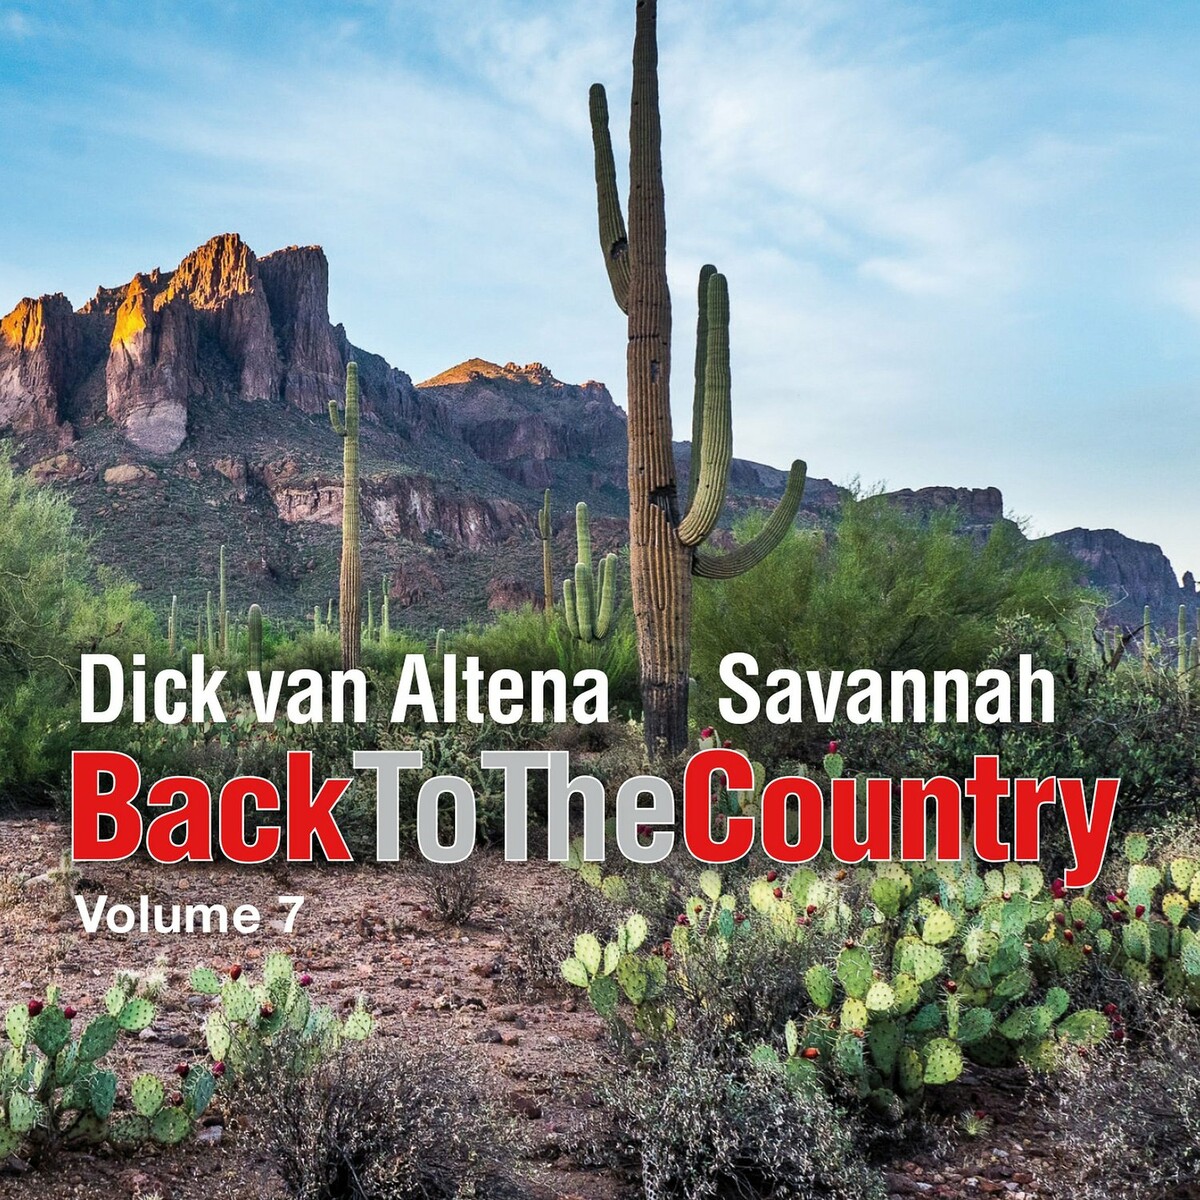 Dick van Altena - Back to the Country, Vol. 7 (2022) FLAC + MP3